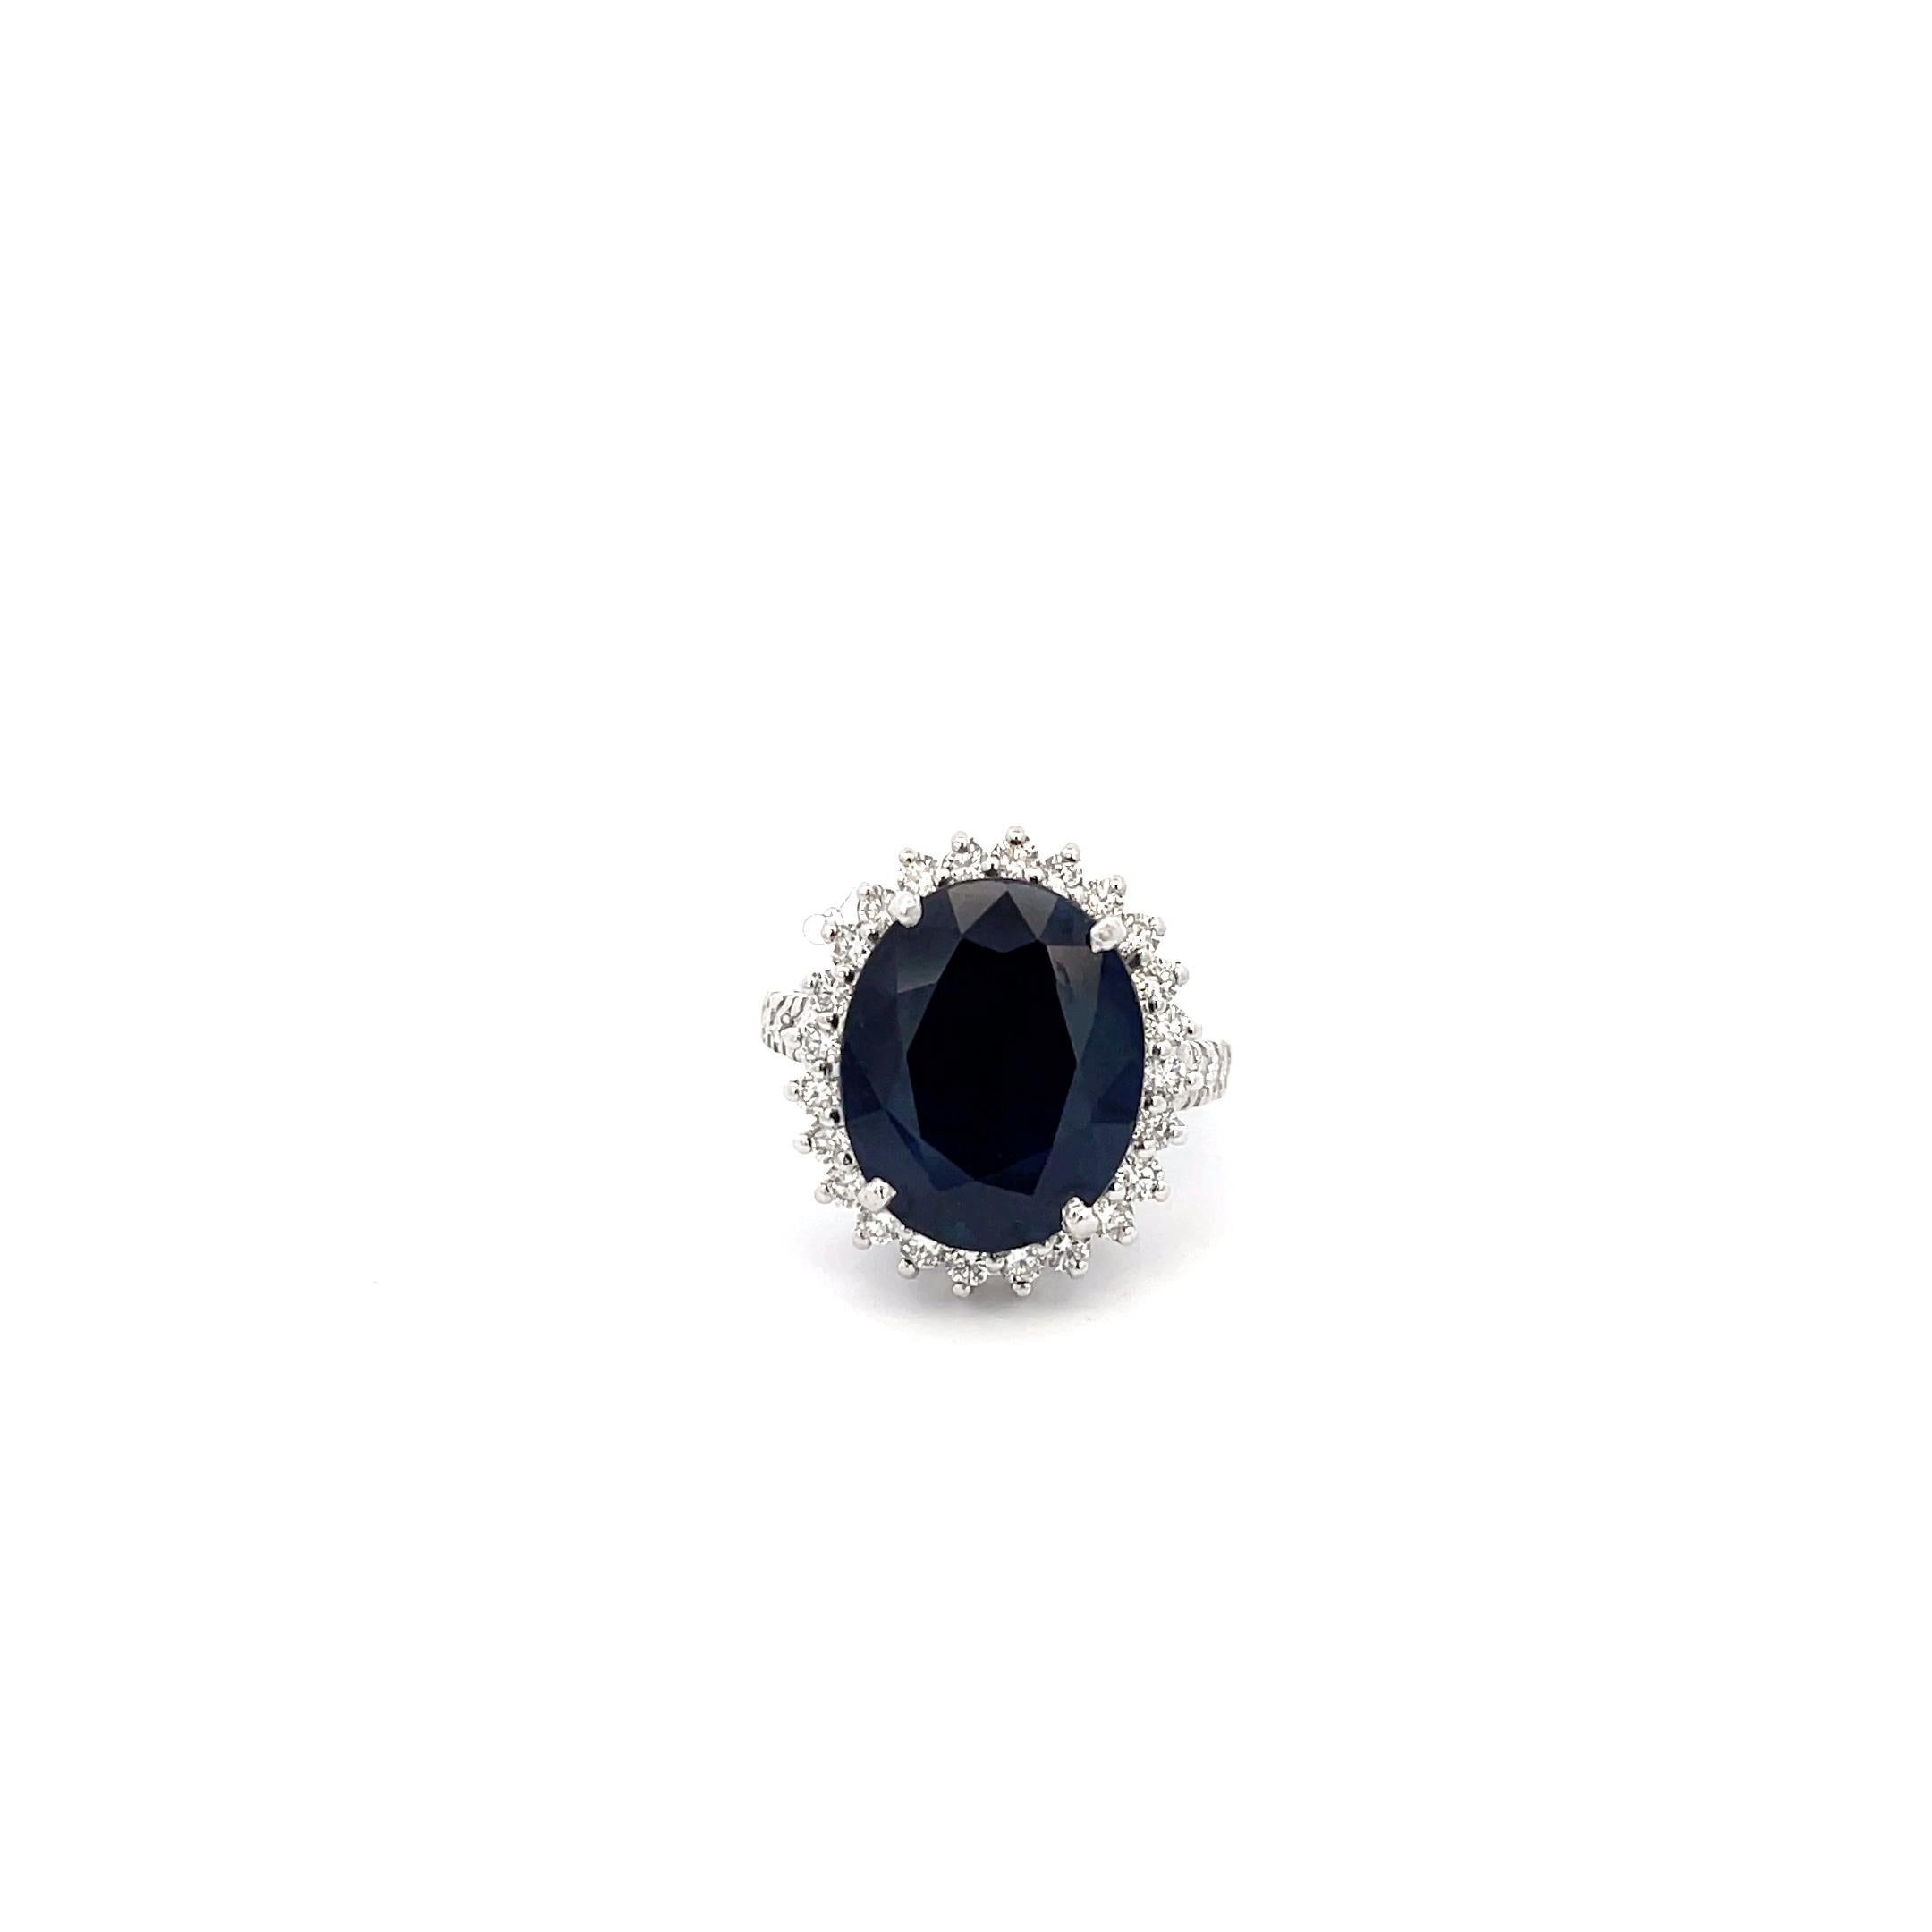 Blue Oval Sapphire and Diamond Ring in 14K White Gold. The ring features an oval cut 11.91ct blue sapphire accented by 1.08ctw of brilliant round diamonds, H-I color, SI2-I1 clarity. The ring is size 7 and weighs 5.7 grams.